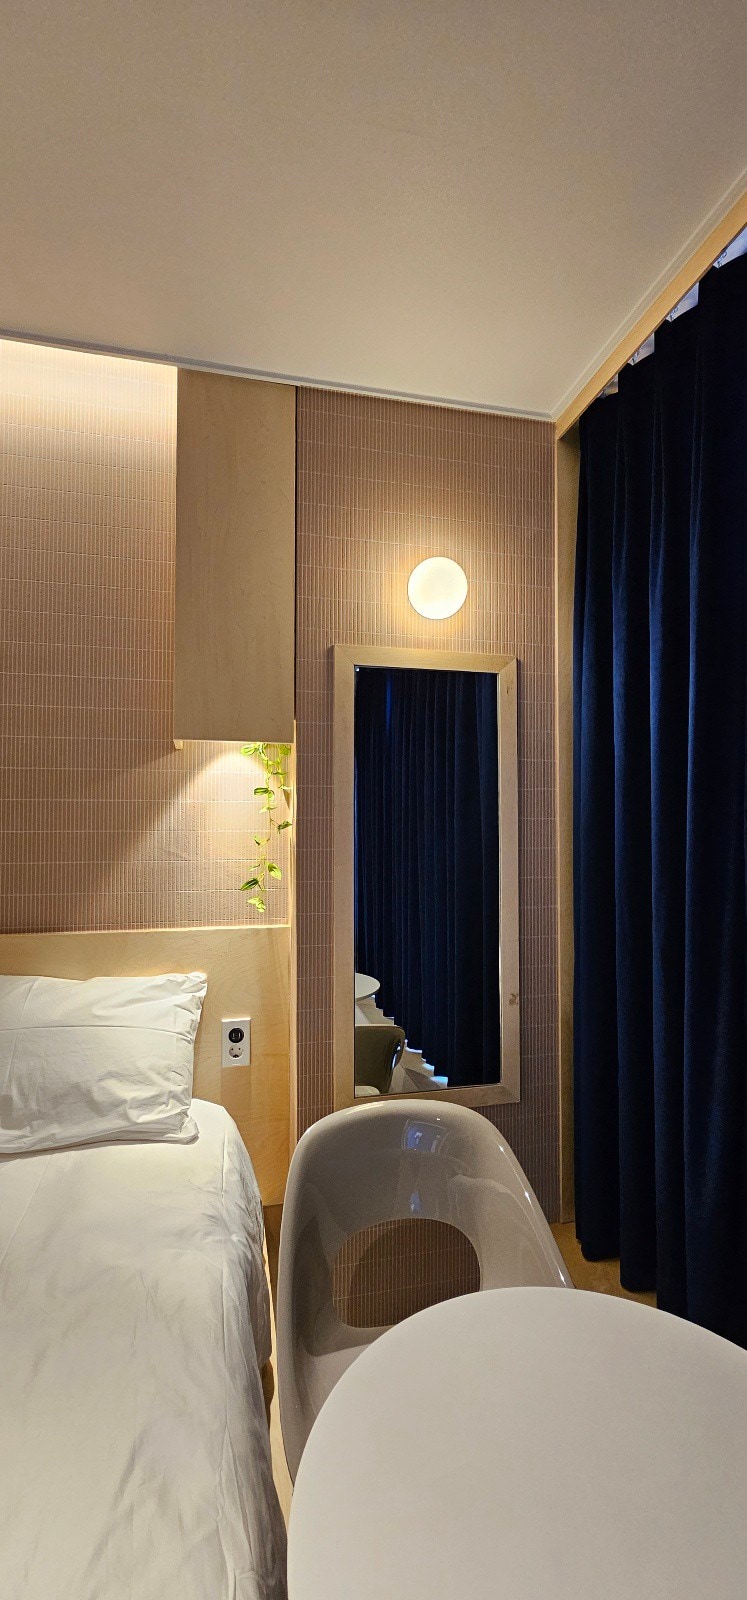 Myeongdong hithere city Deluxe double room